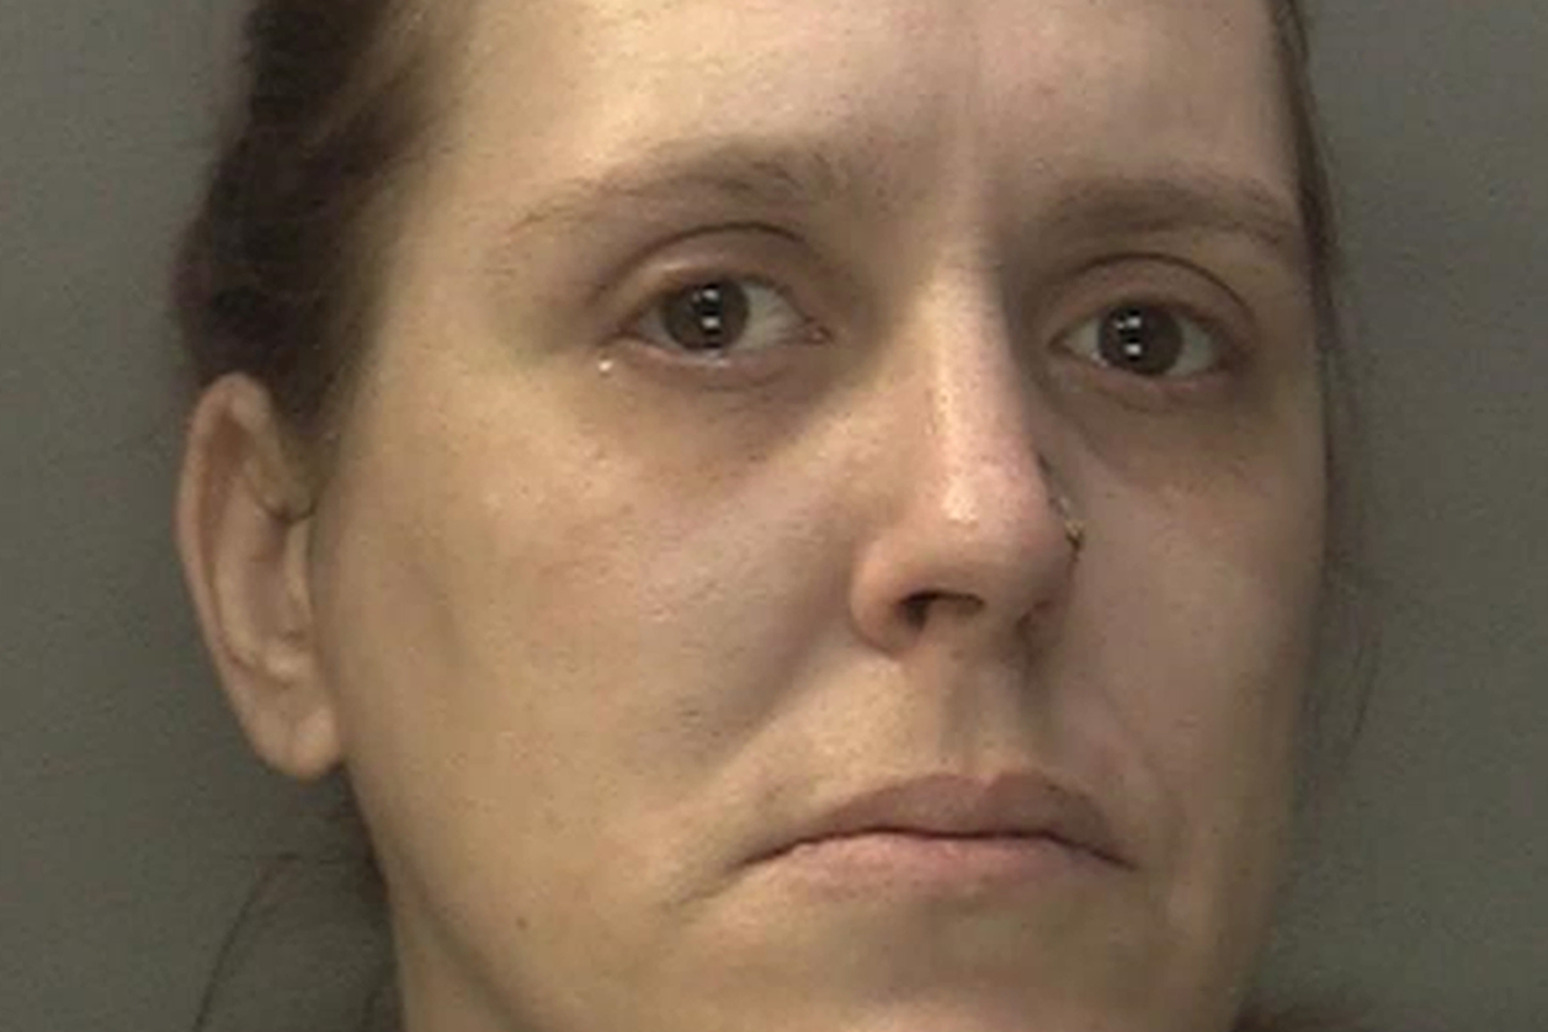 Heroin addict mother convicted of fatally neglecting young asthma-suffering son 